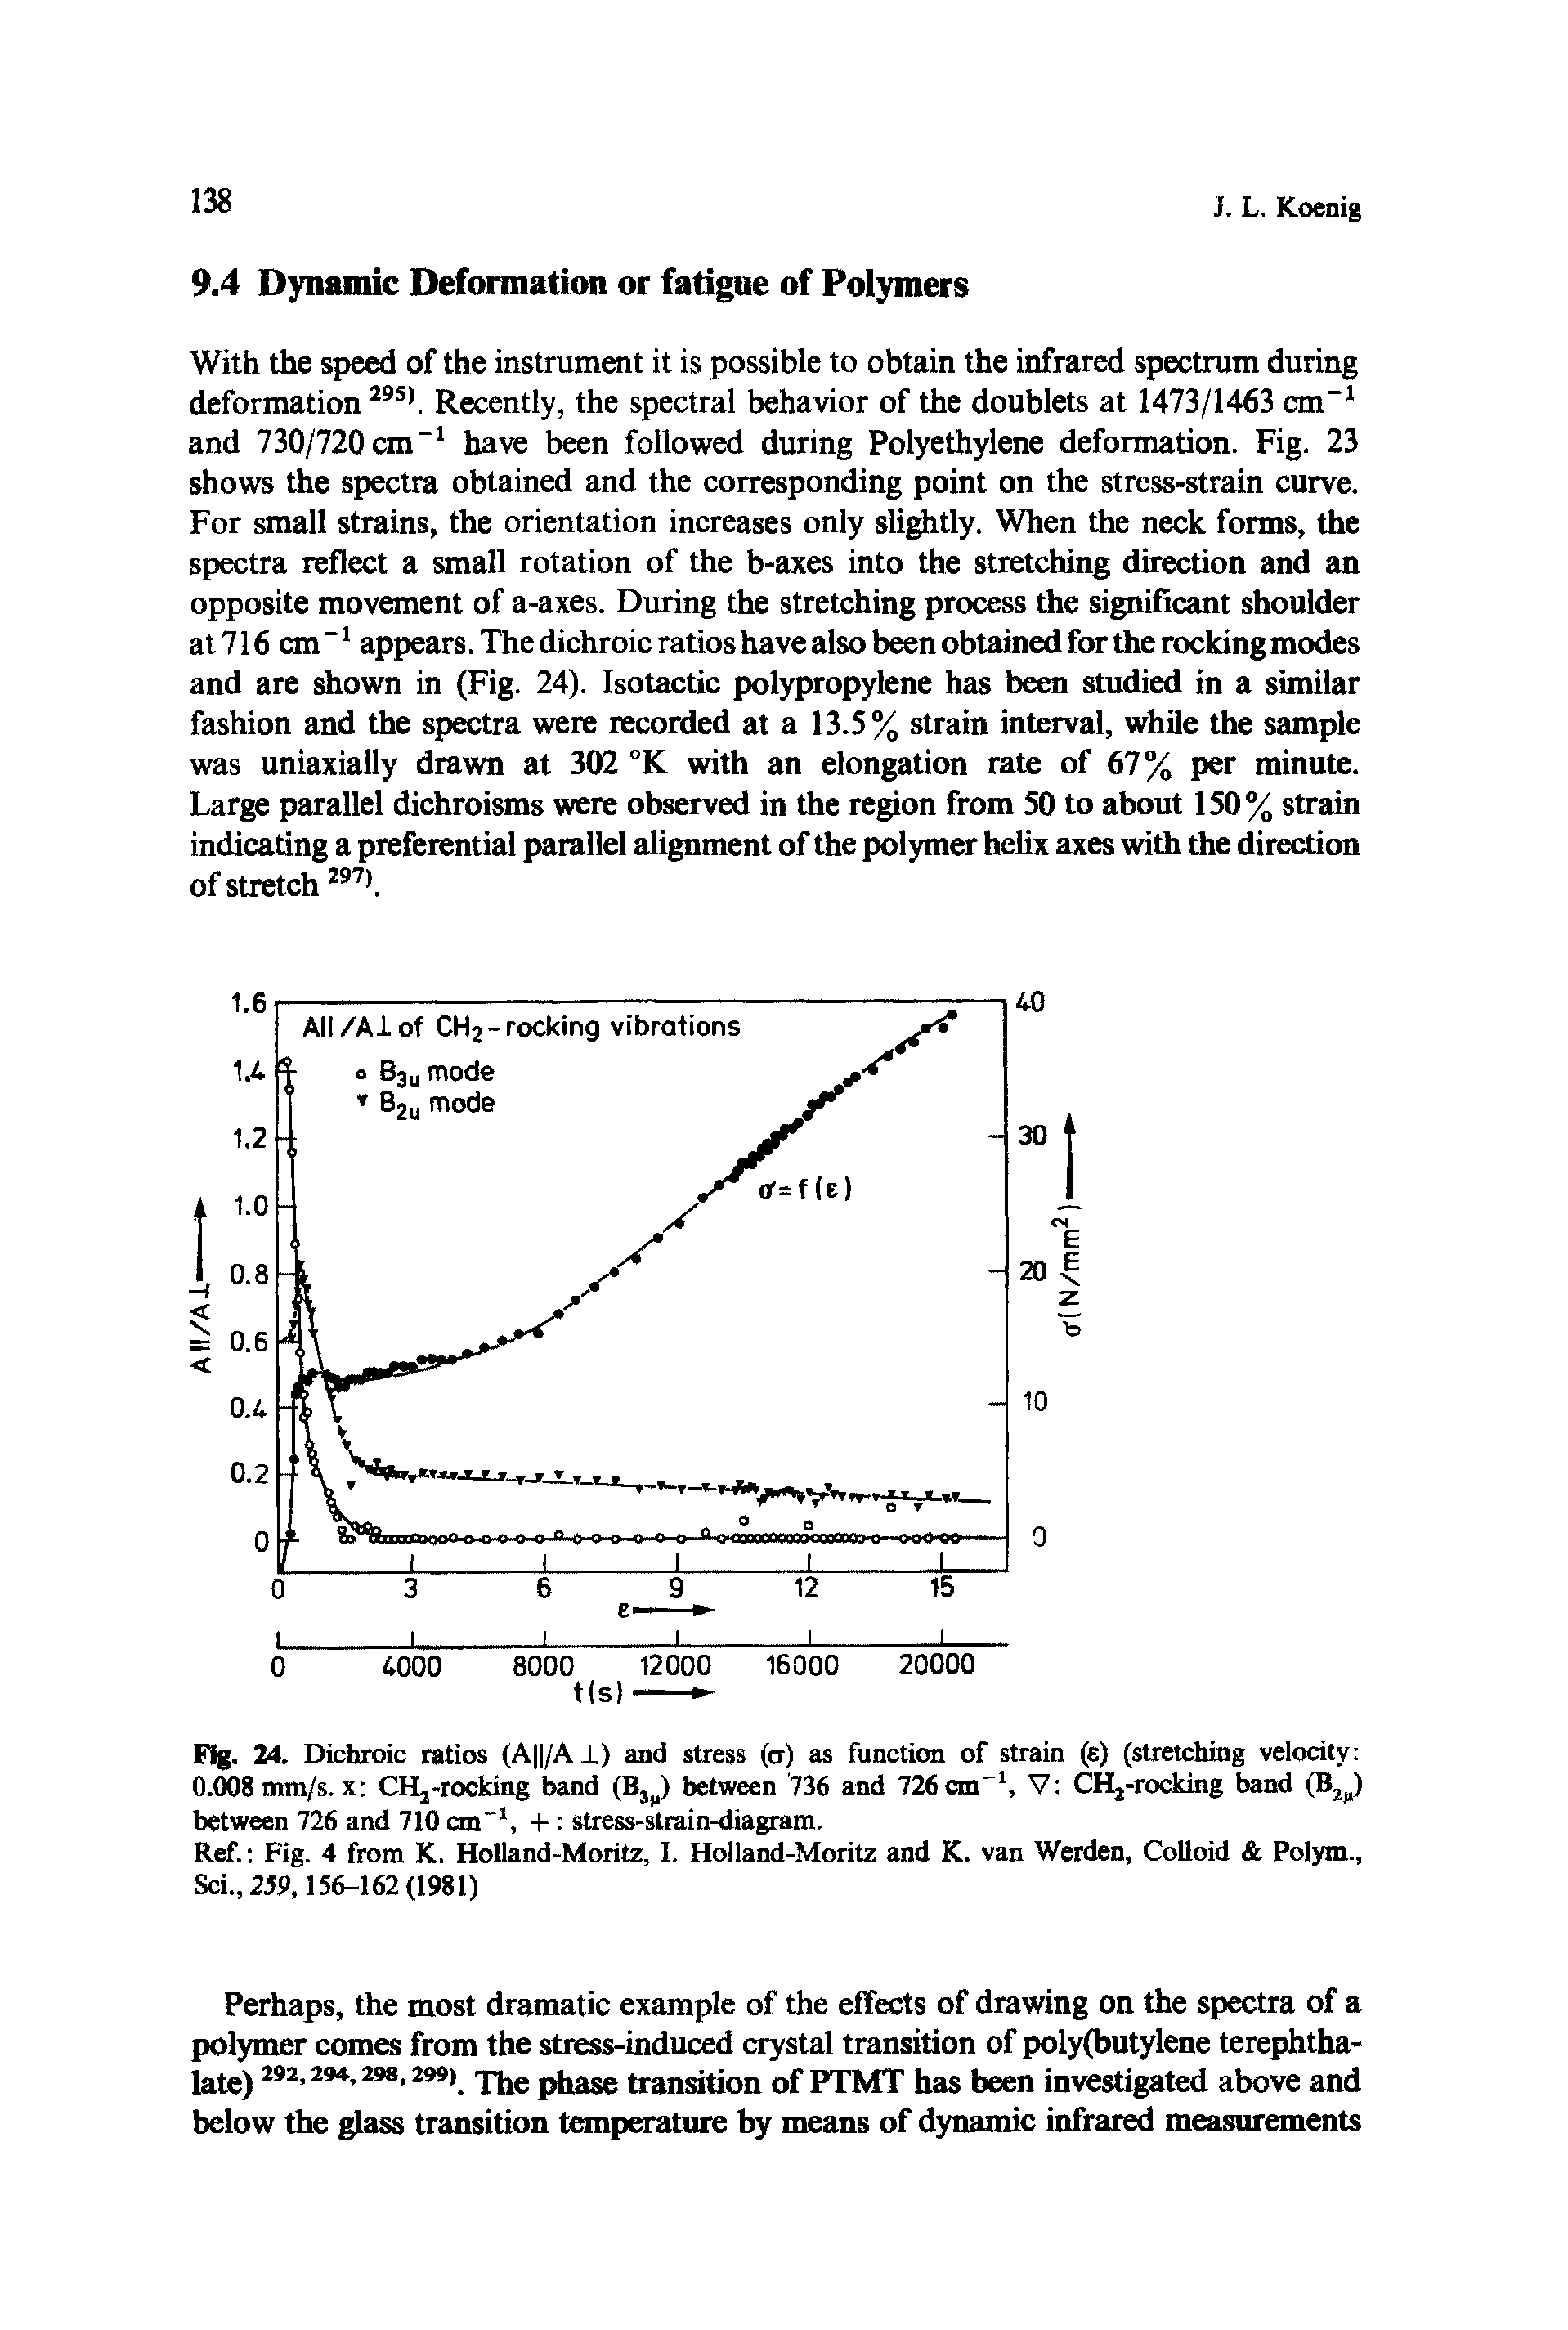 Fig. 24. Dichroic ratios (A /A X) and stress (a) as function of strain (e) (stretching velocity 0.008 mm/s.x CH2-rocking band (BJp) between 736 and 726 cm"1, V CH2-rocking band (B2)j) between 726 and 710 cm"1, + stress-strain-diagram.